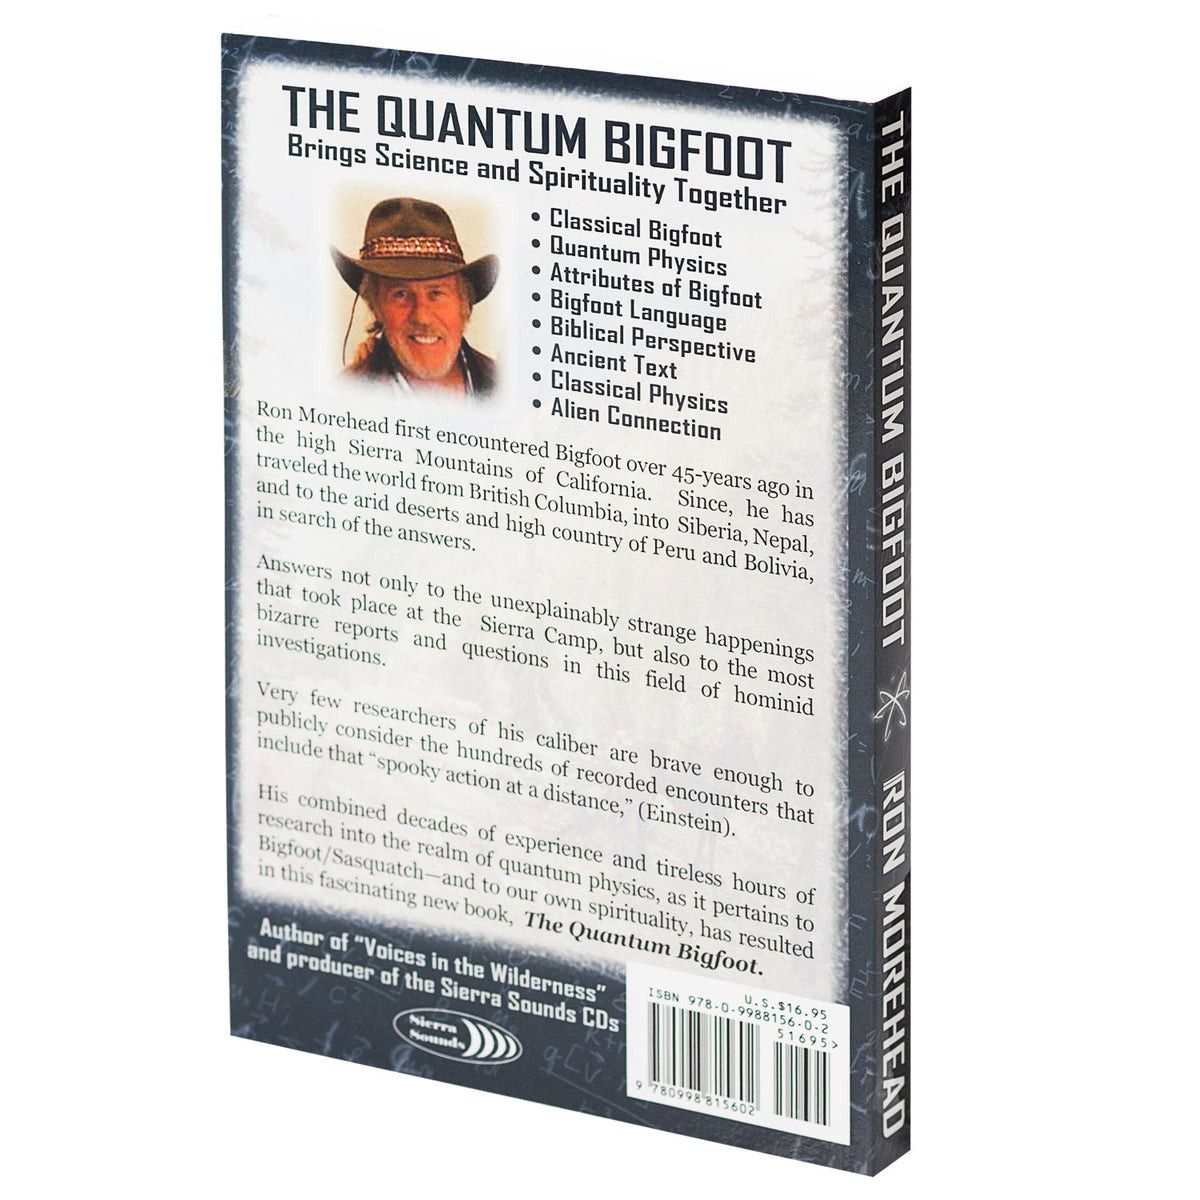 The Quantum Bigfoot: Bringing Science and Spirituality Together